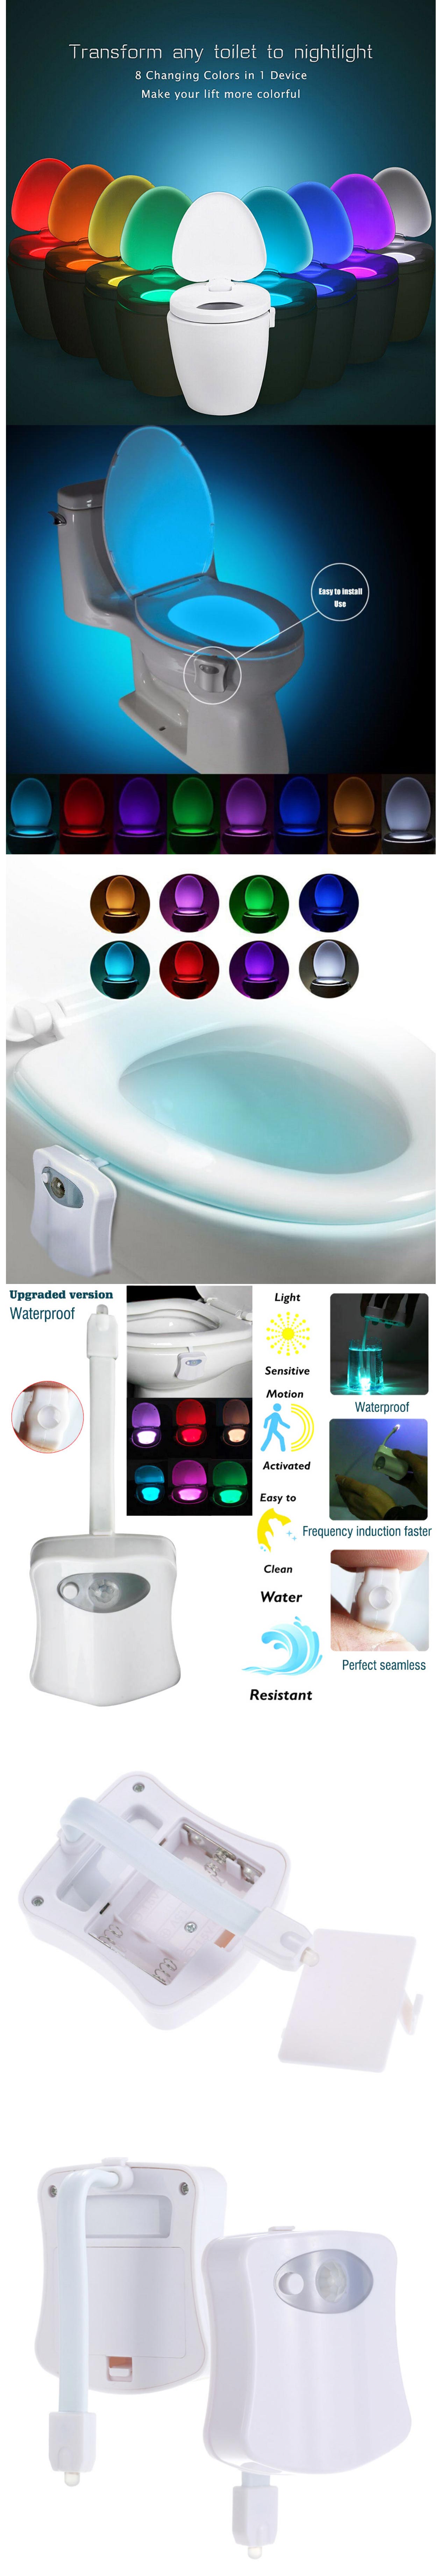 2 Pack Toilet Night Light 8 Color Changing Night Light Motion